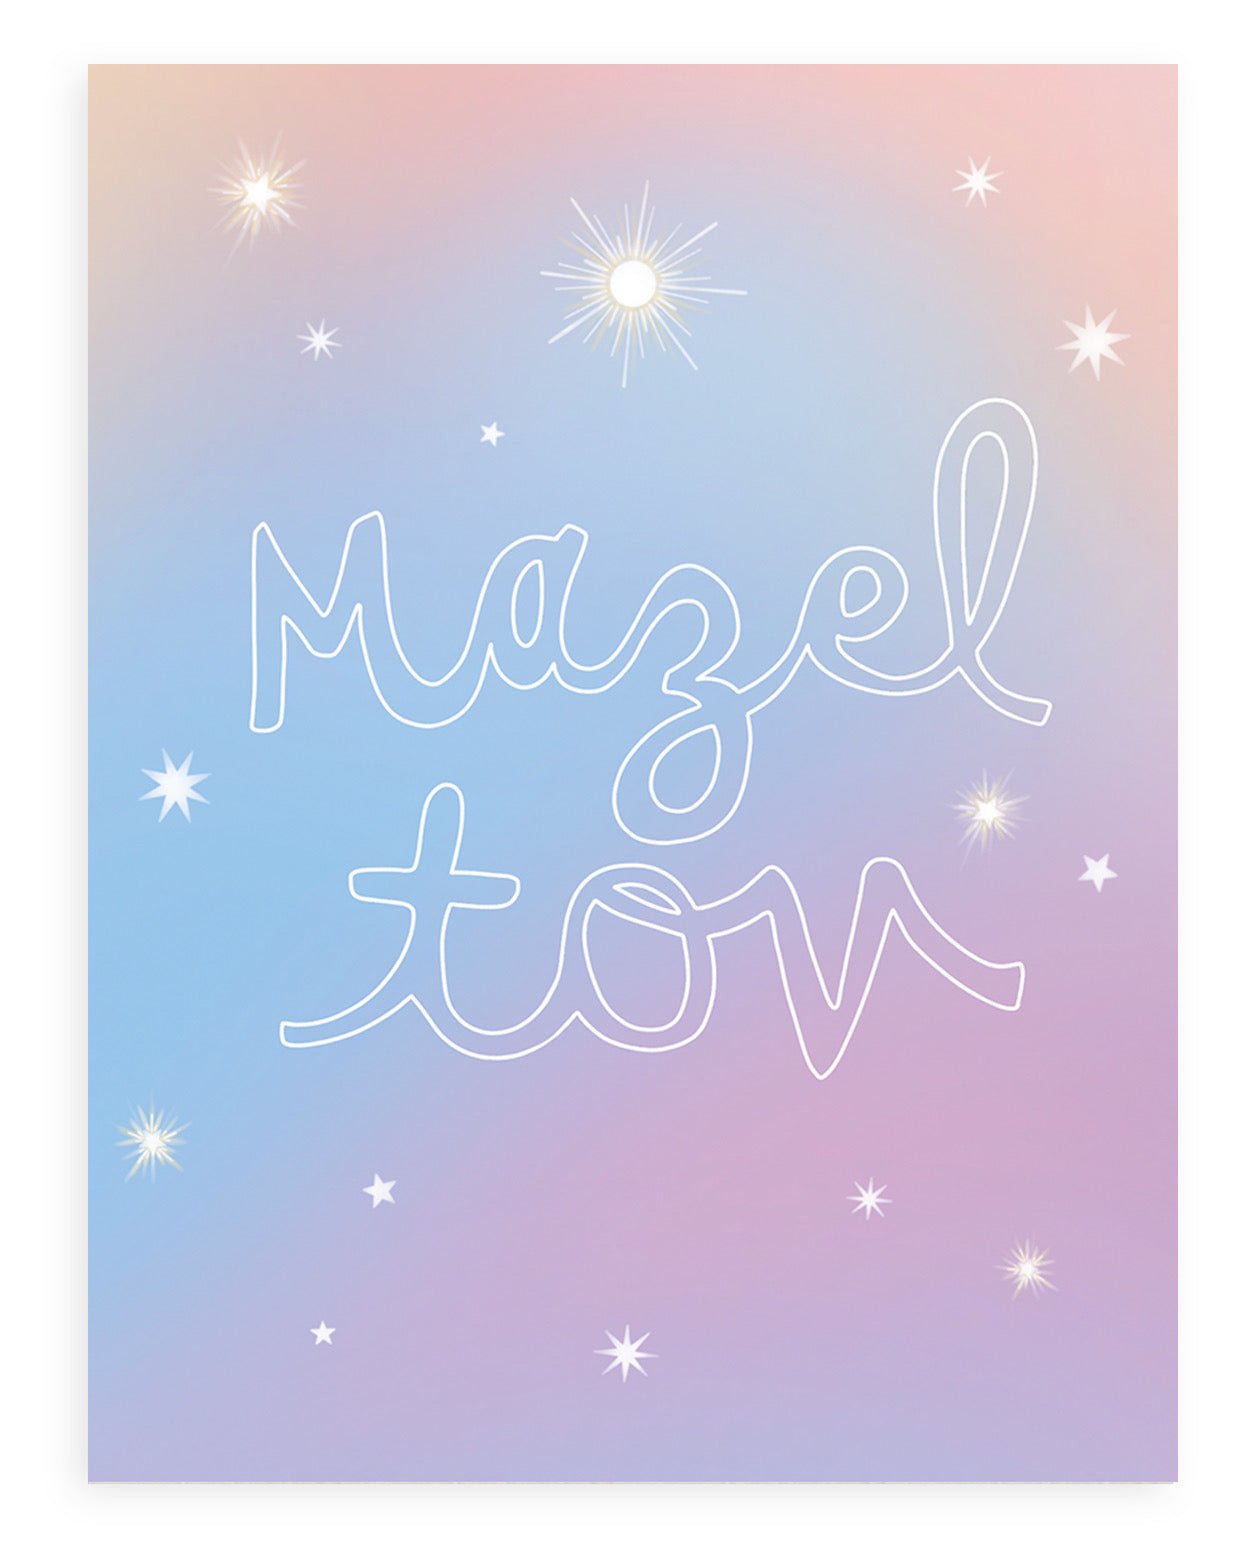 "Mazel Tov" in large, hollow cursive on a gradient blue-lavender background with various kinds of stars printed on cardstock with a white background.